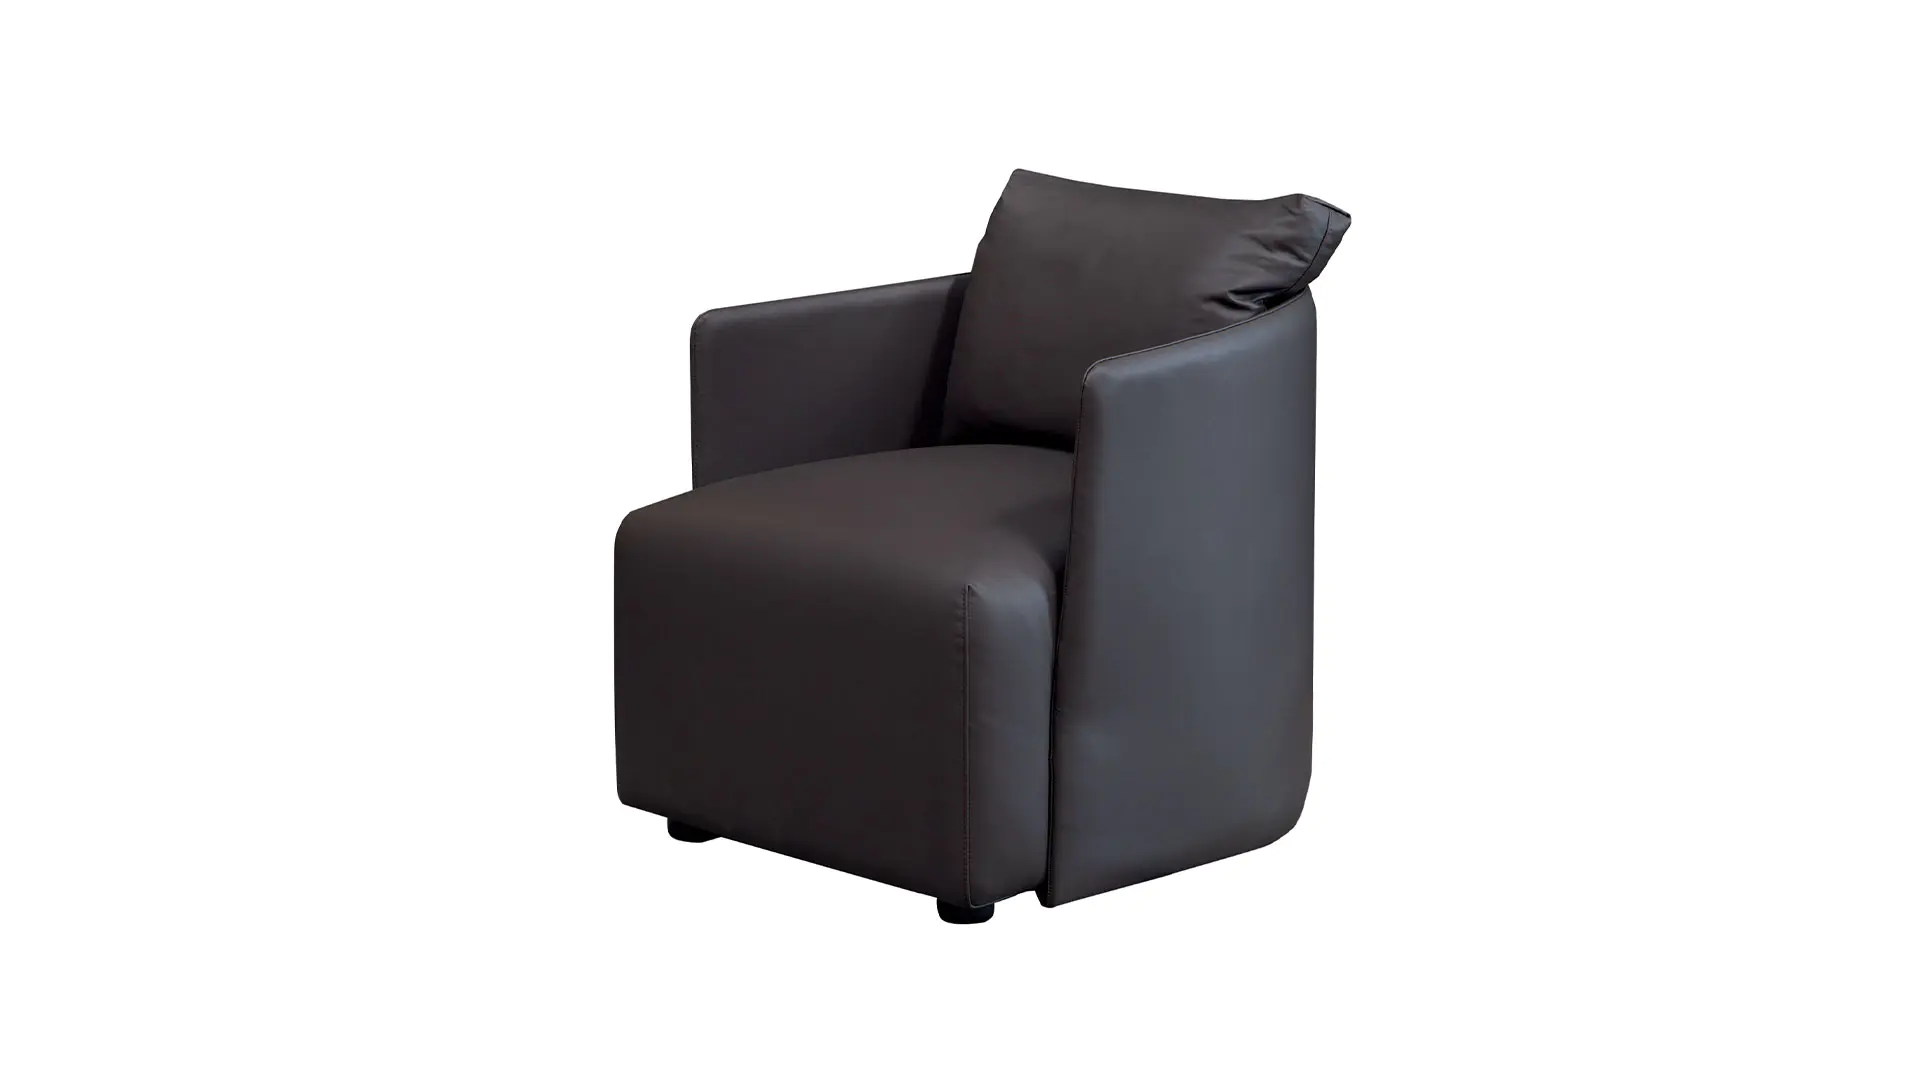 Luxury Comfortable Furniture Leather ArmChair Black Arm Chairs For Living Room Lounge